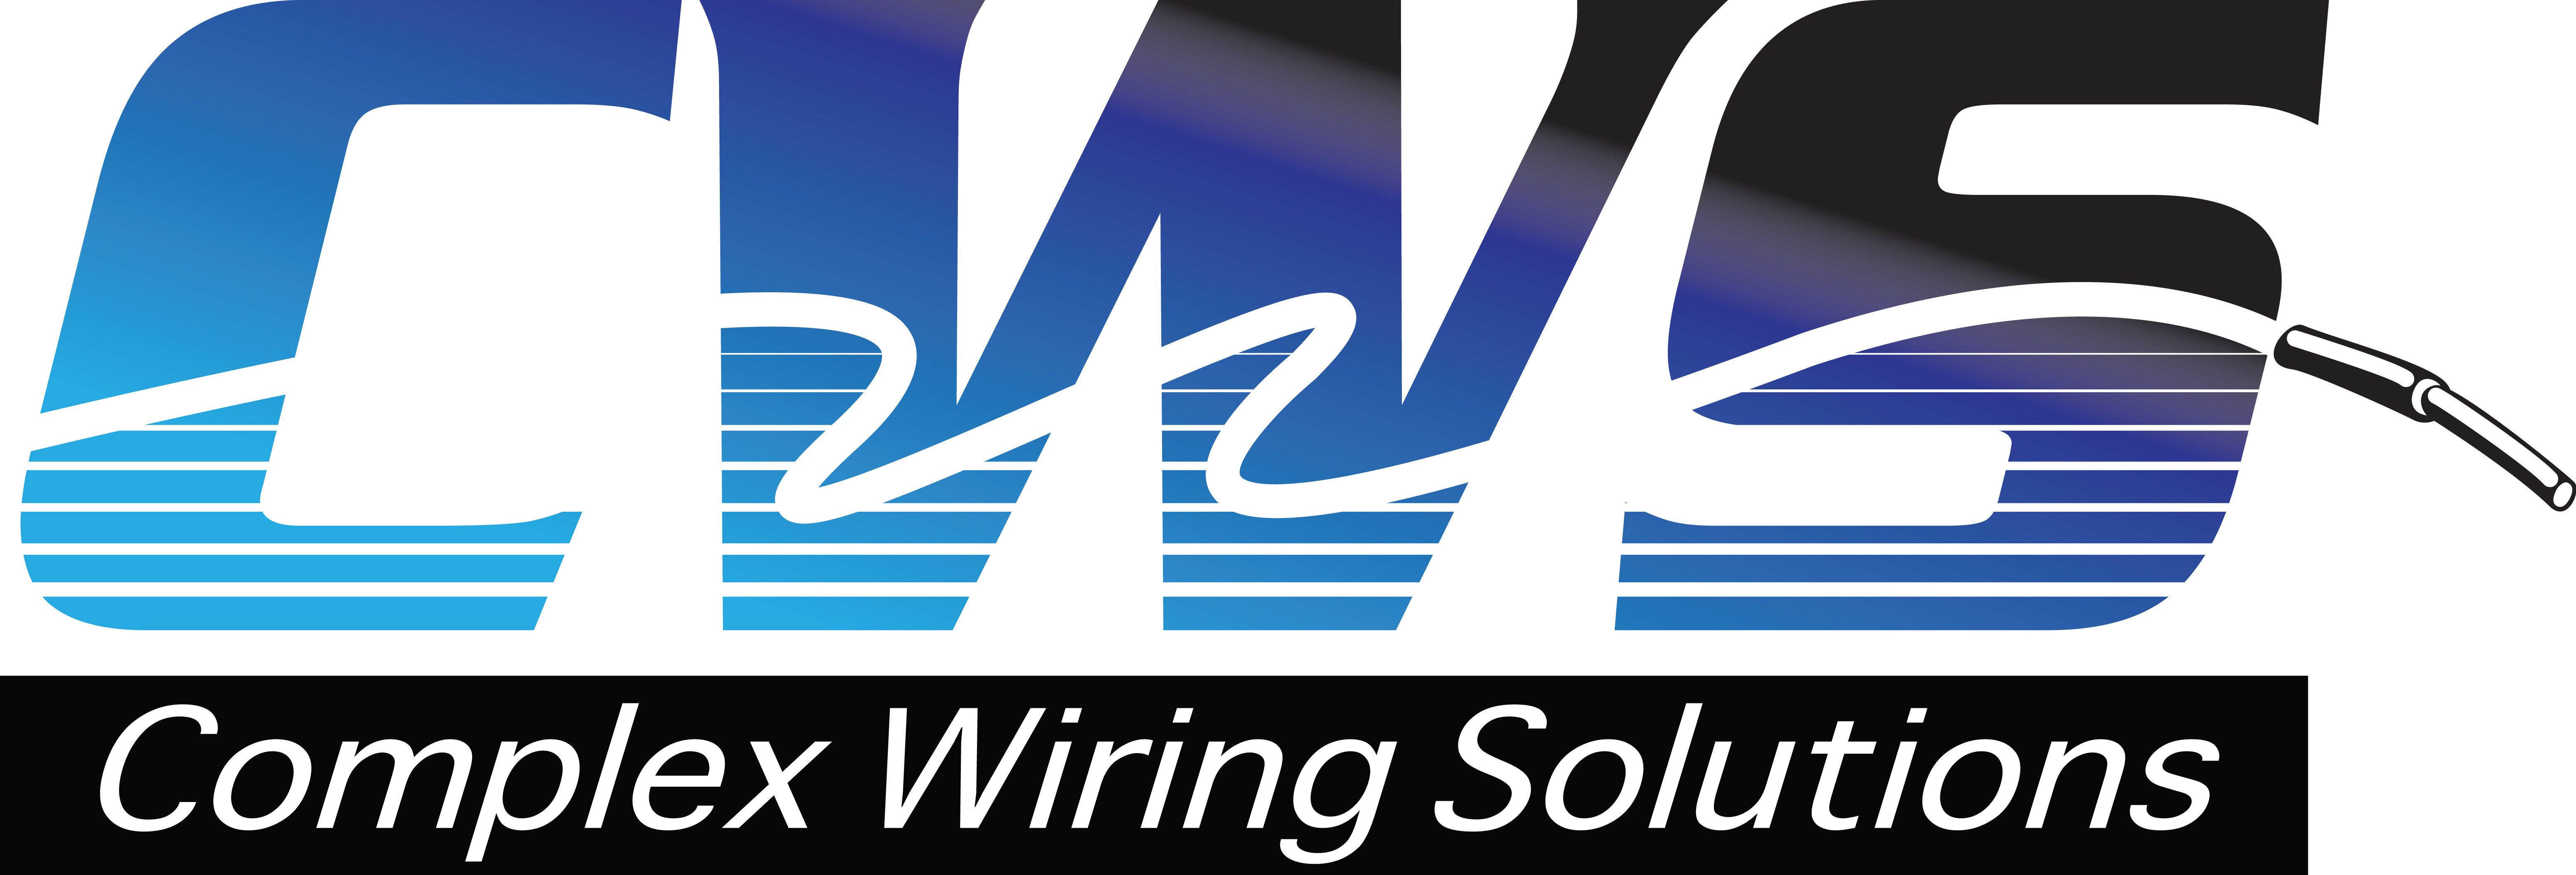 Complex Wiring Solutions Logo-Lg